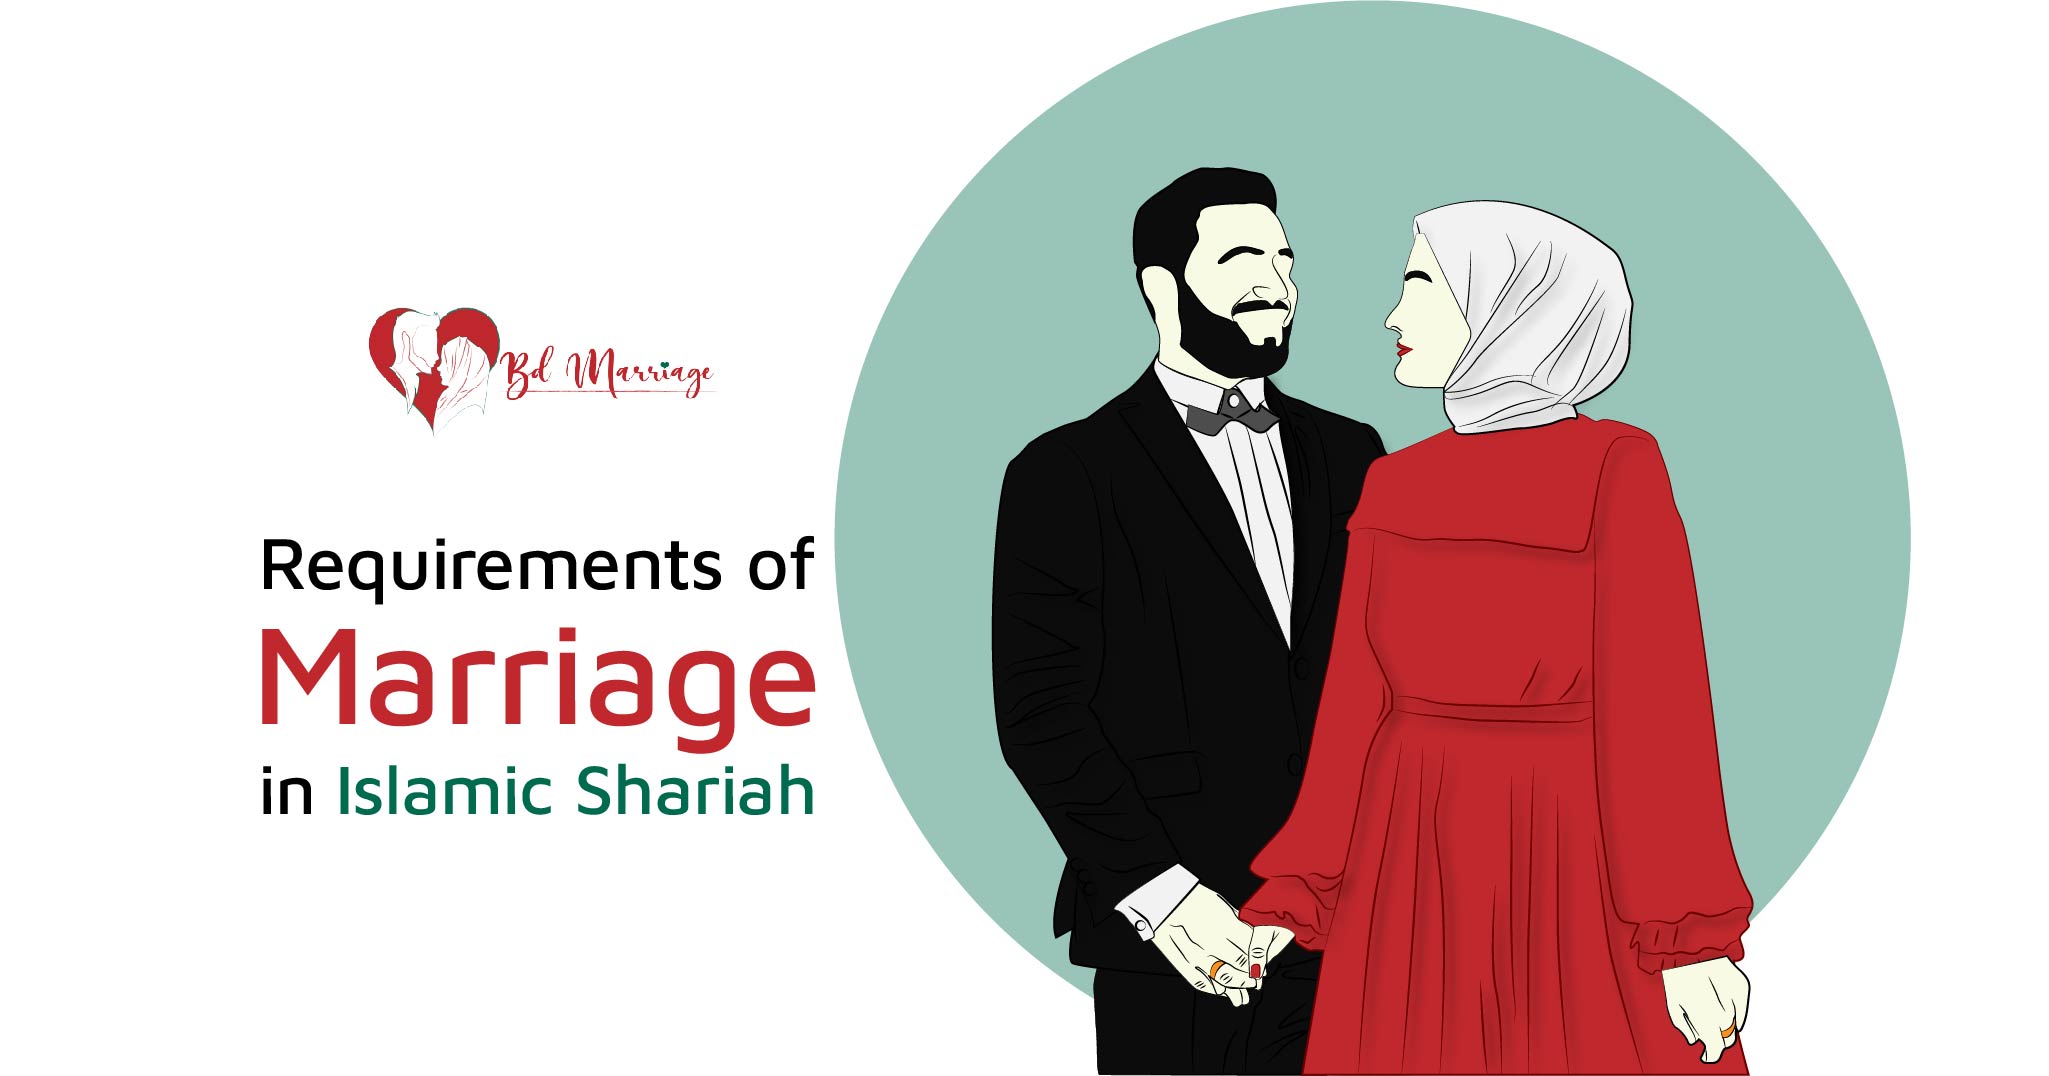 Requirements of Marriage in Islamic Shariah